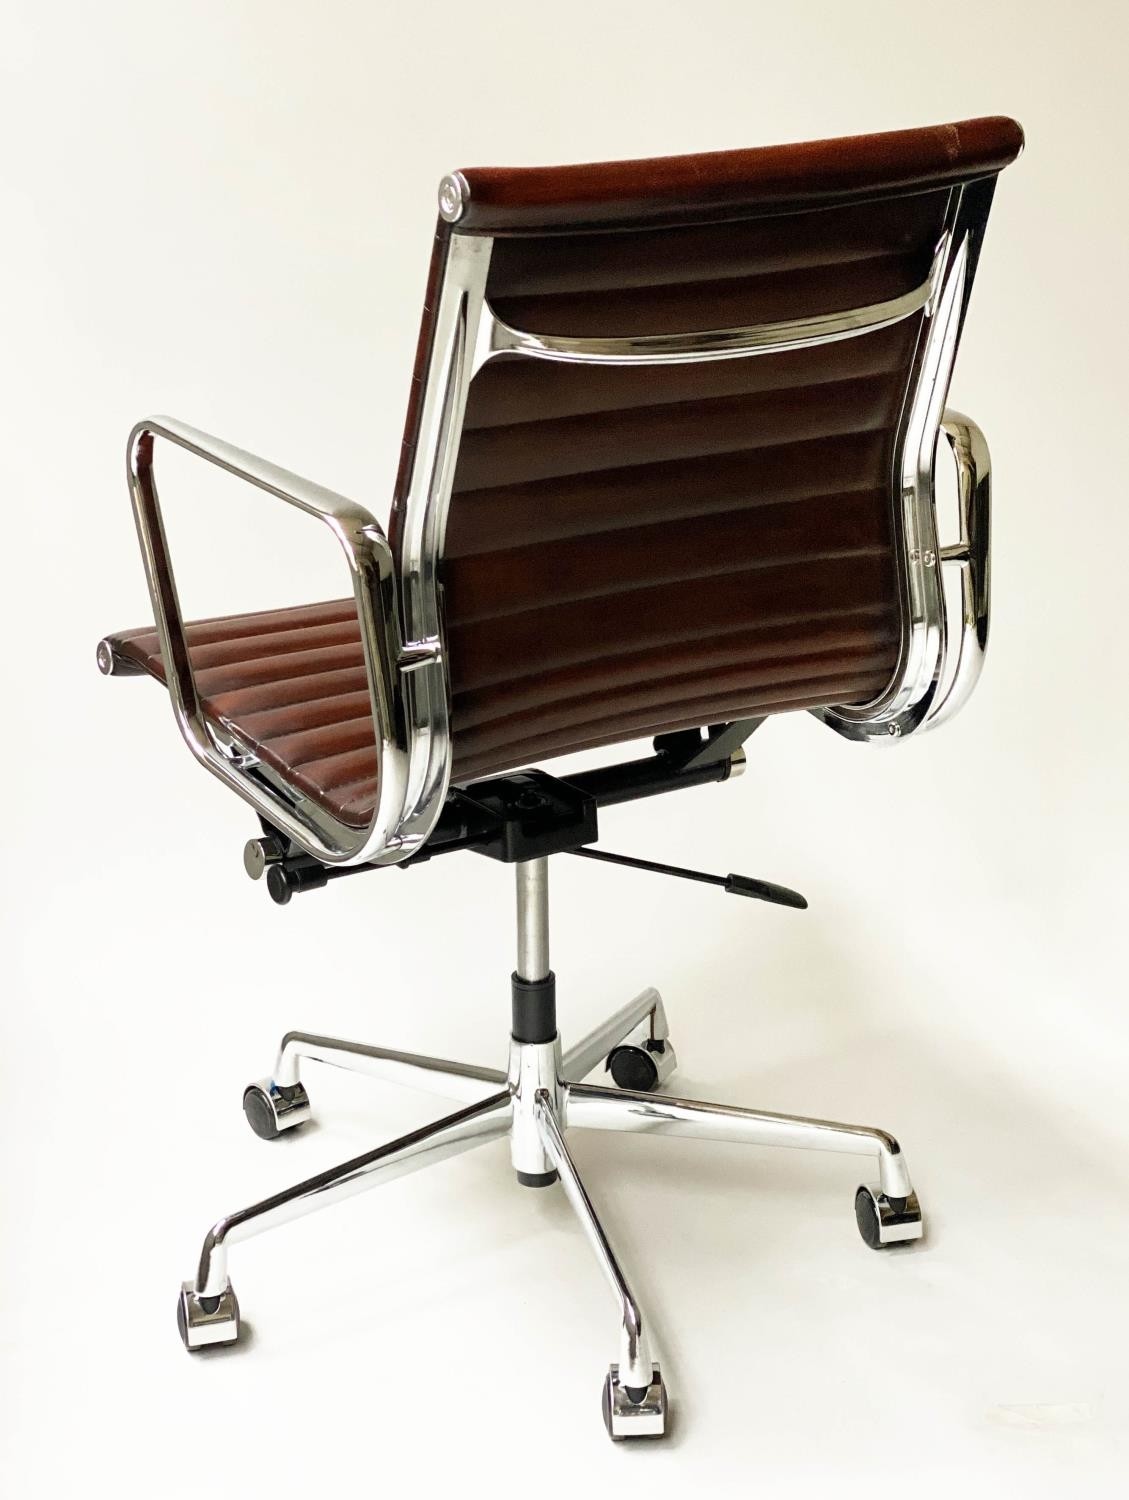 REVOLVING DESK CHAIR, Charles and Ray Eames inspired with ribbed mid brown leather seat revolving - Image 4 of 8